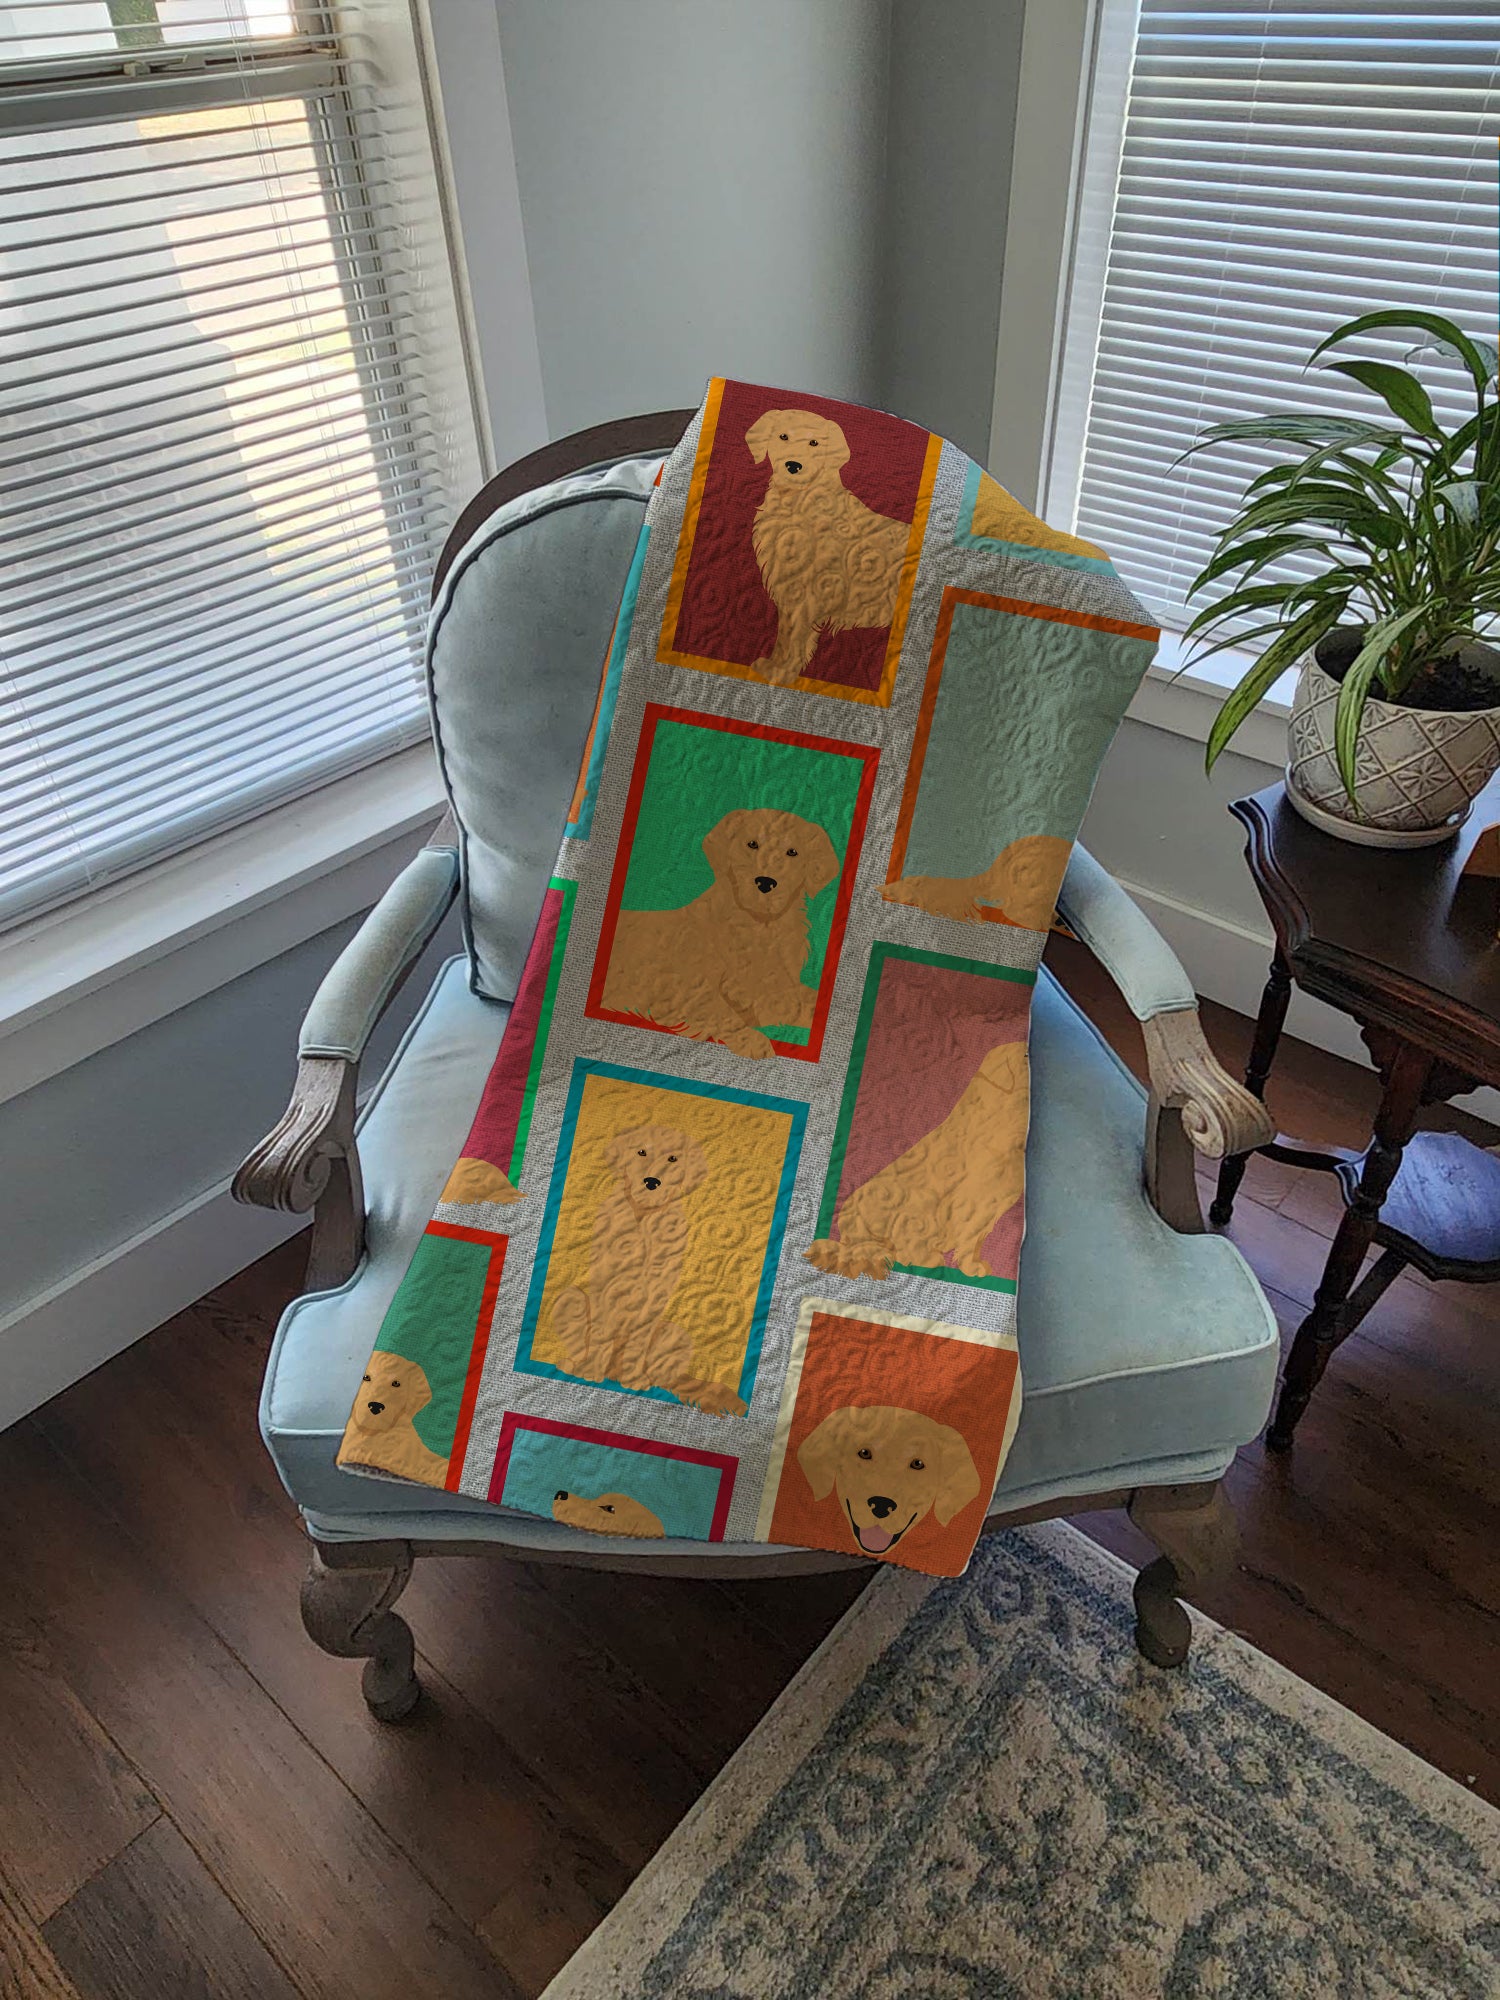 Lots of Golden Retriever Quilted Blanket 50x60 - the-store.com